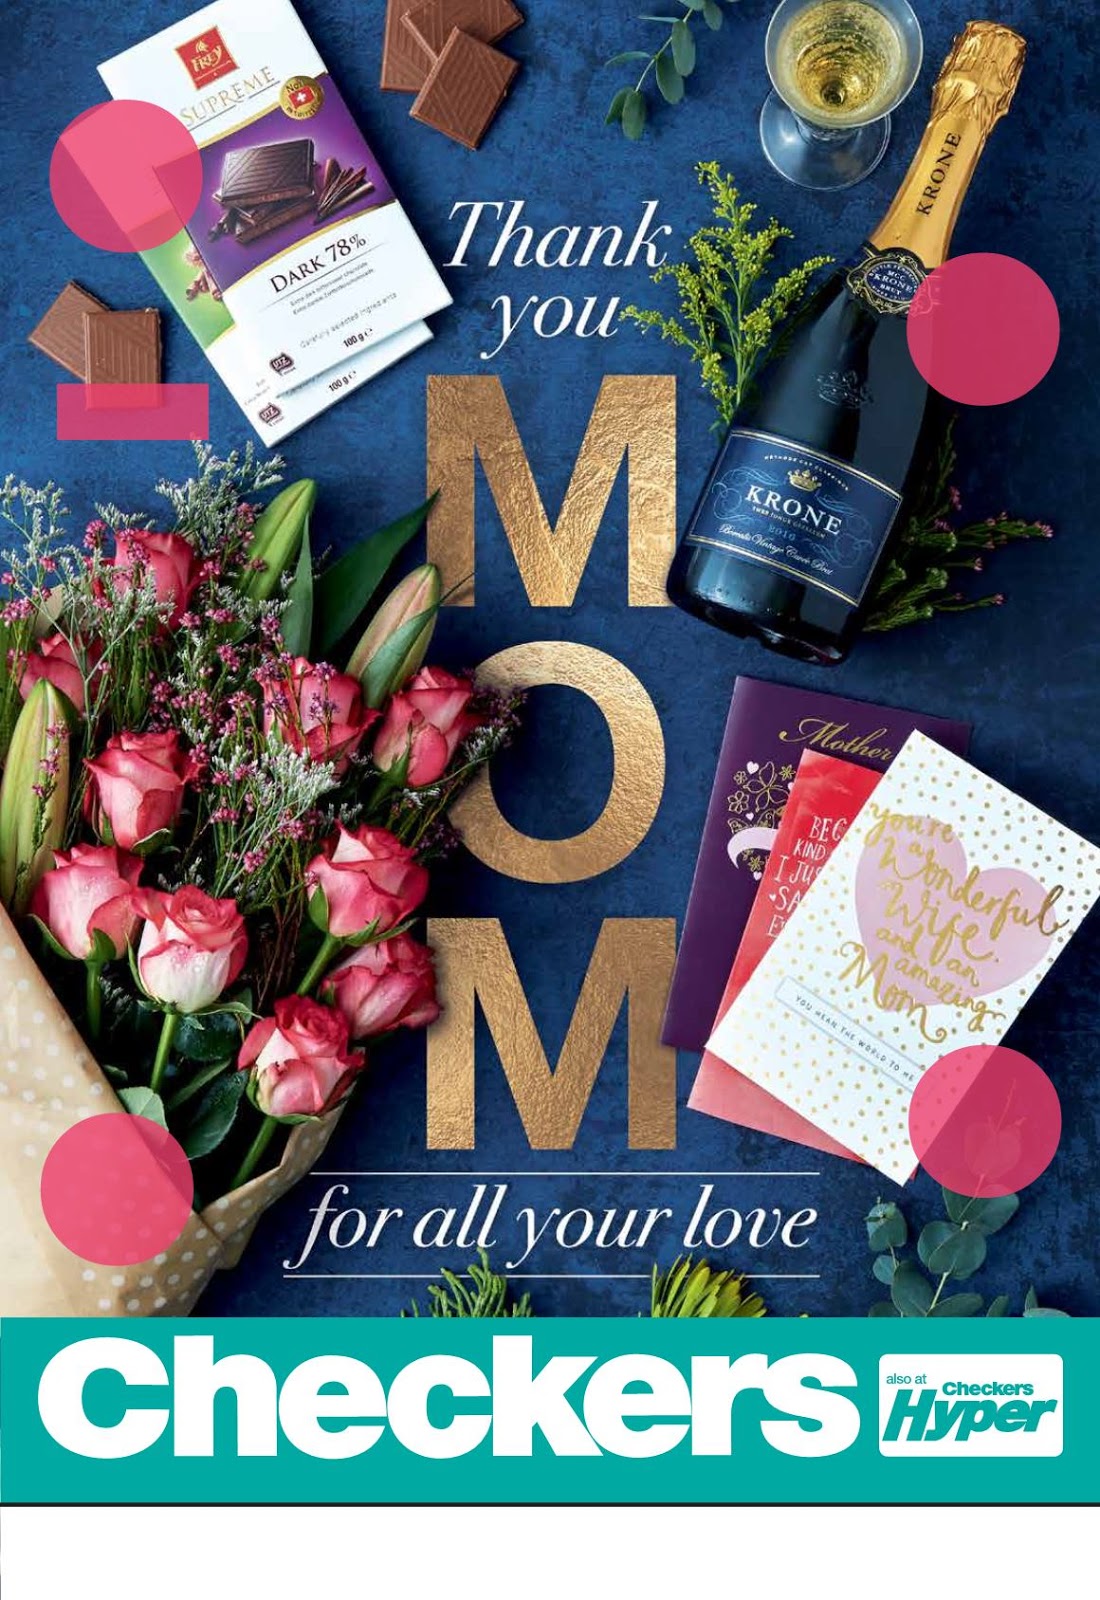 Grocery Specials South Africa Mother's day special Checkers and Hyper